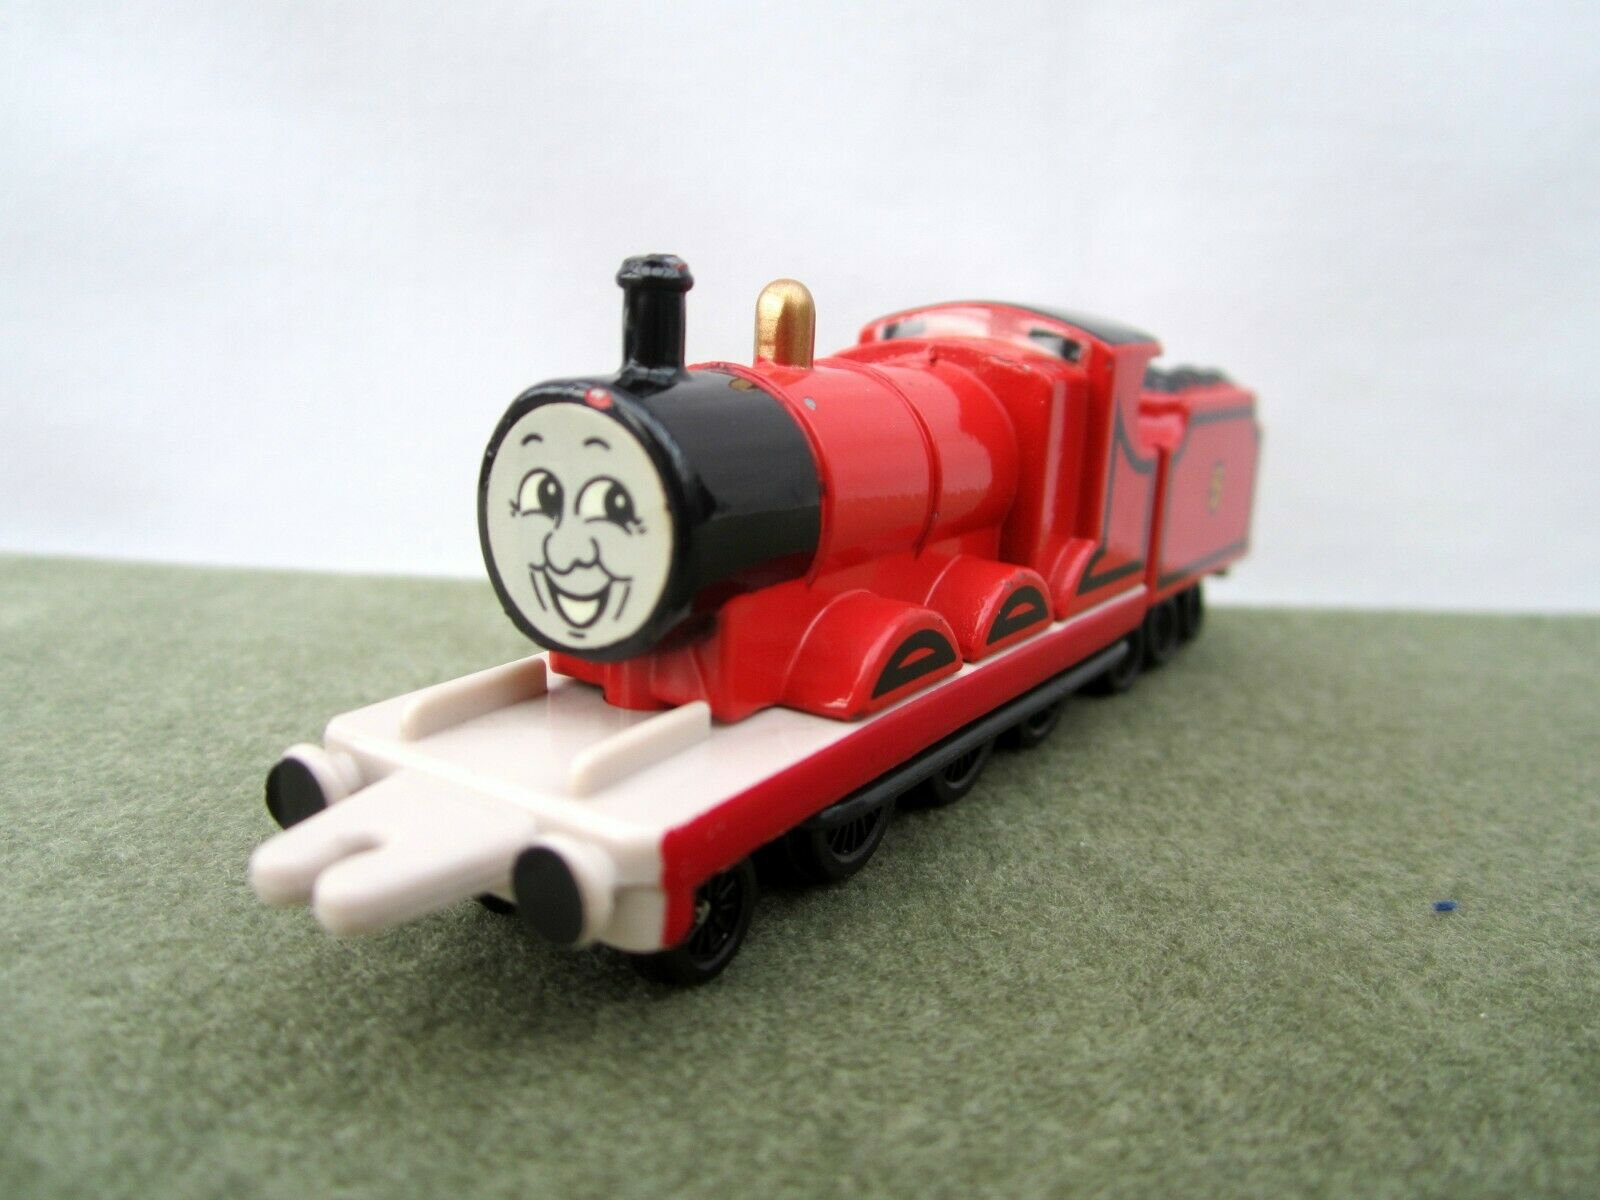 James the Red Engine - Thomas & Friends - Basic Series - ERTL Action Figure